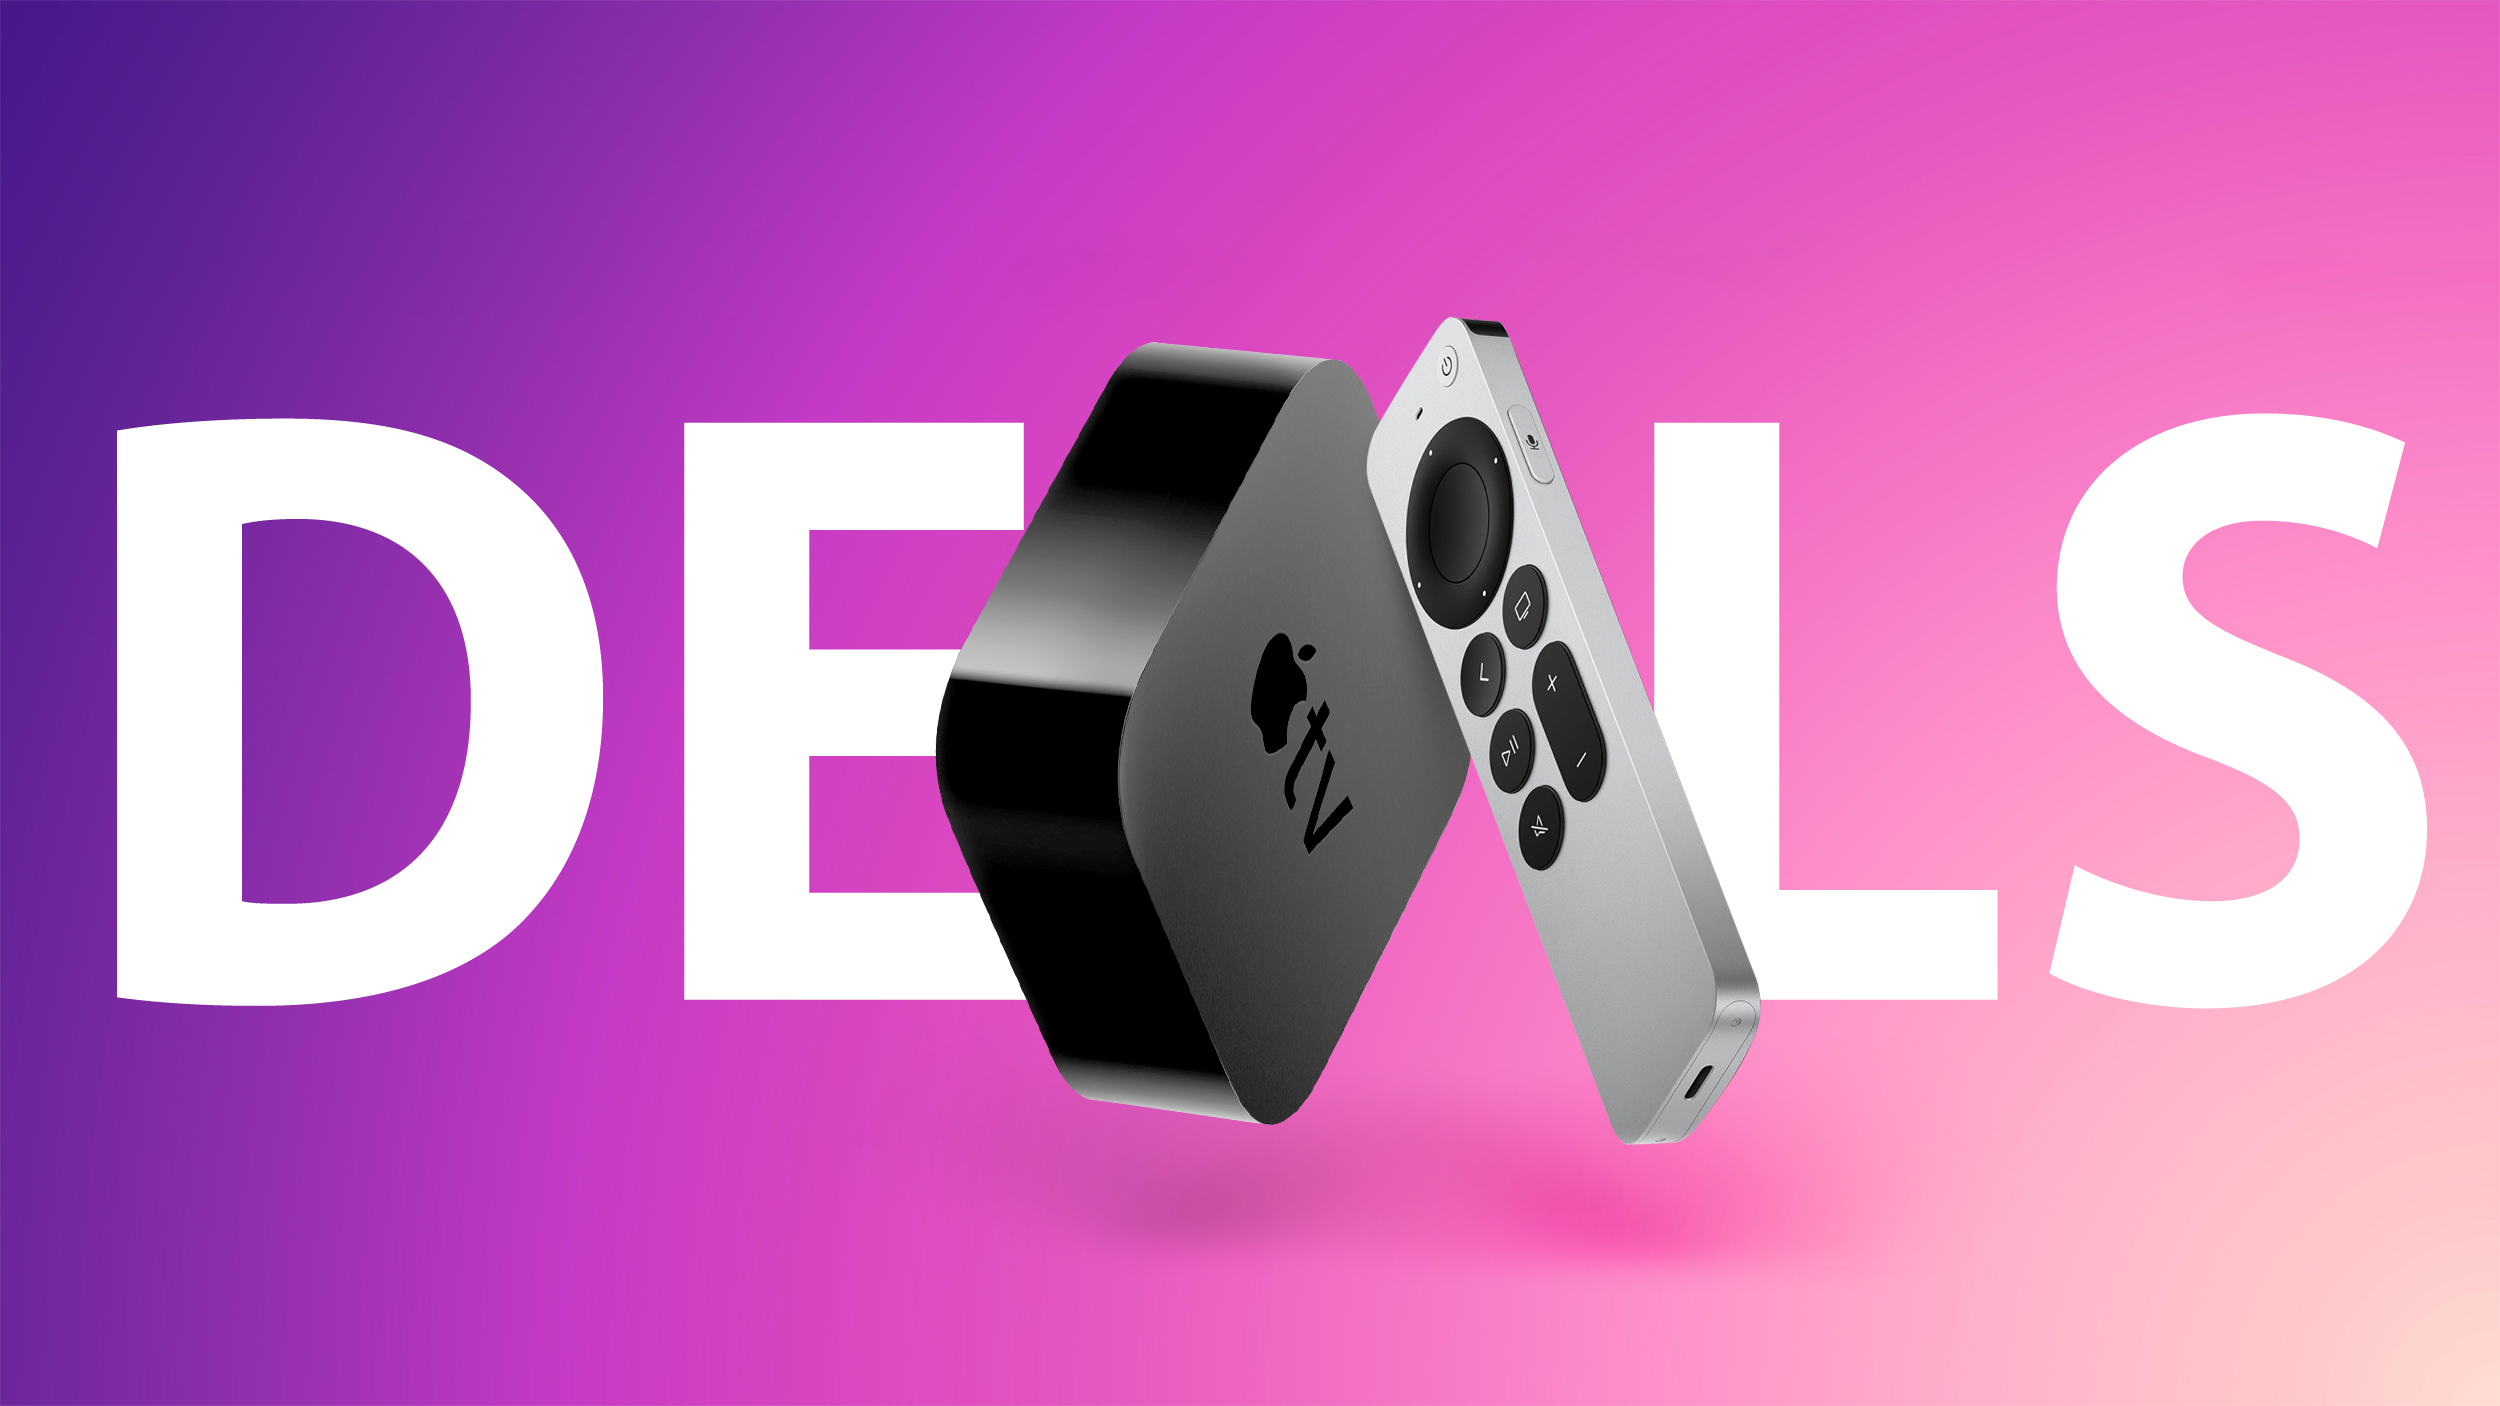 Deals: Get the 64GB 2021 Apple TV 4K for All-Time Low Price of $109.99